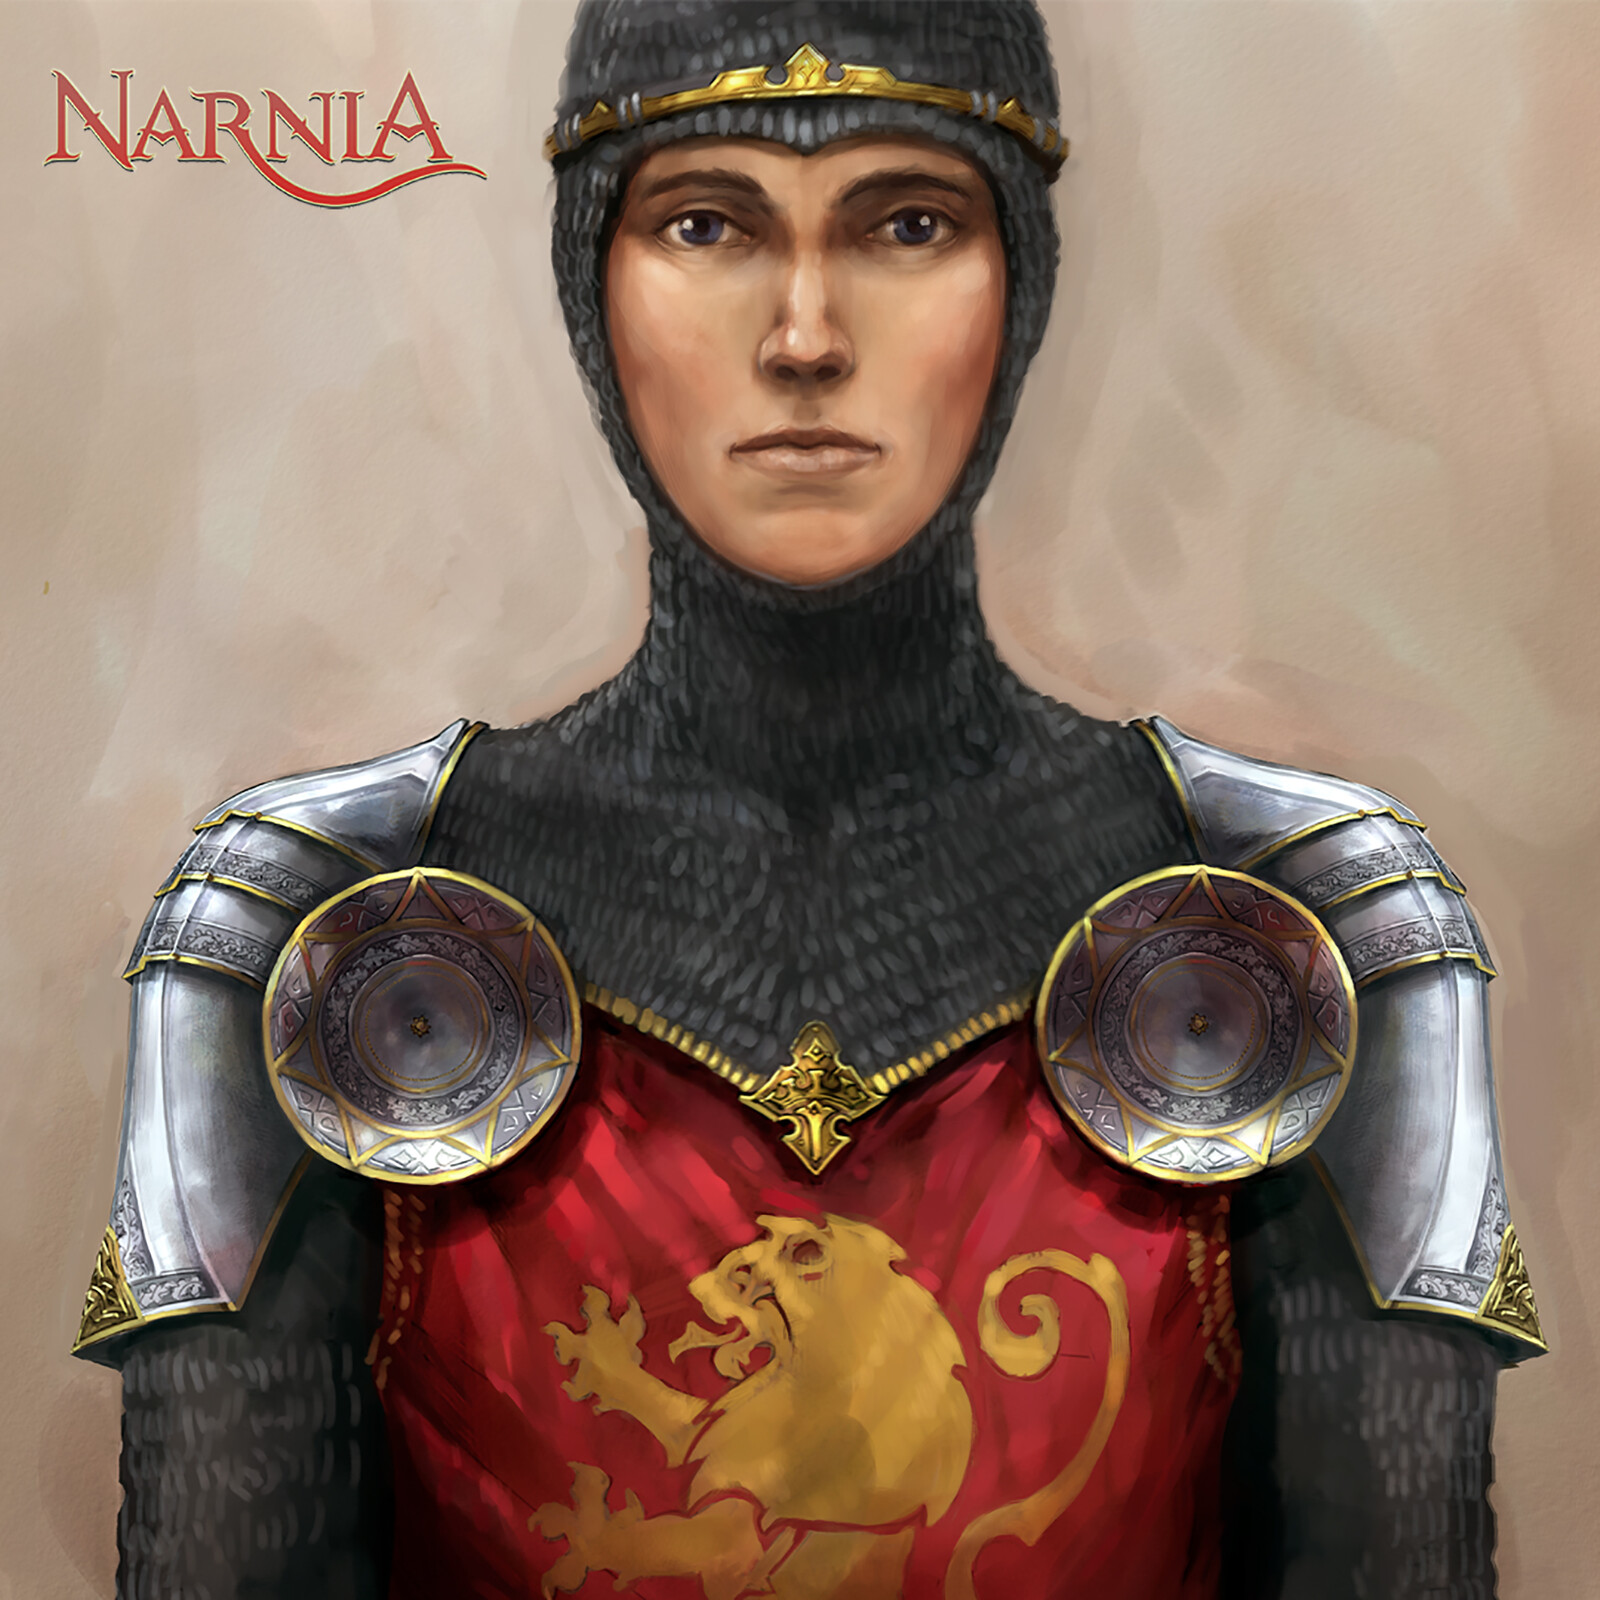 Narnia: King Peter's Armory